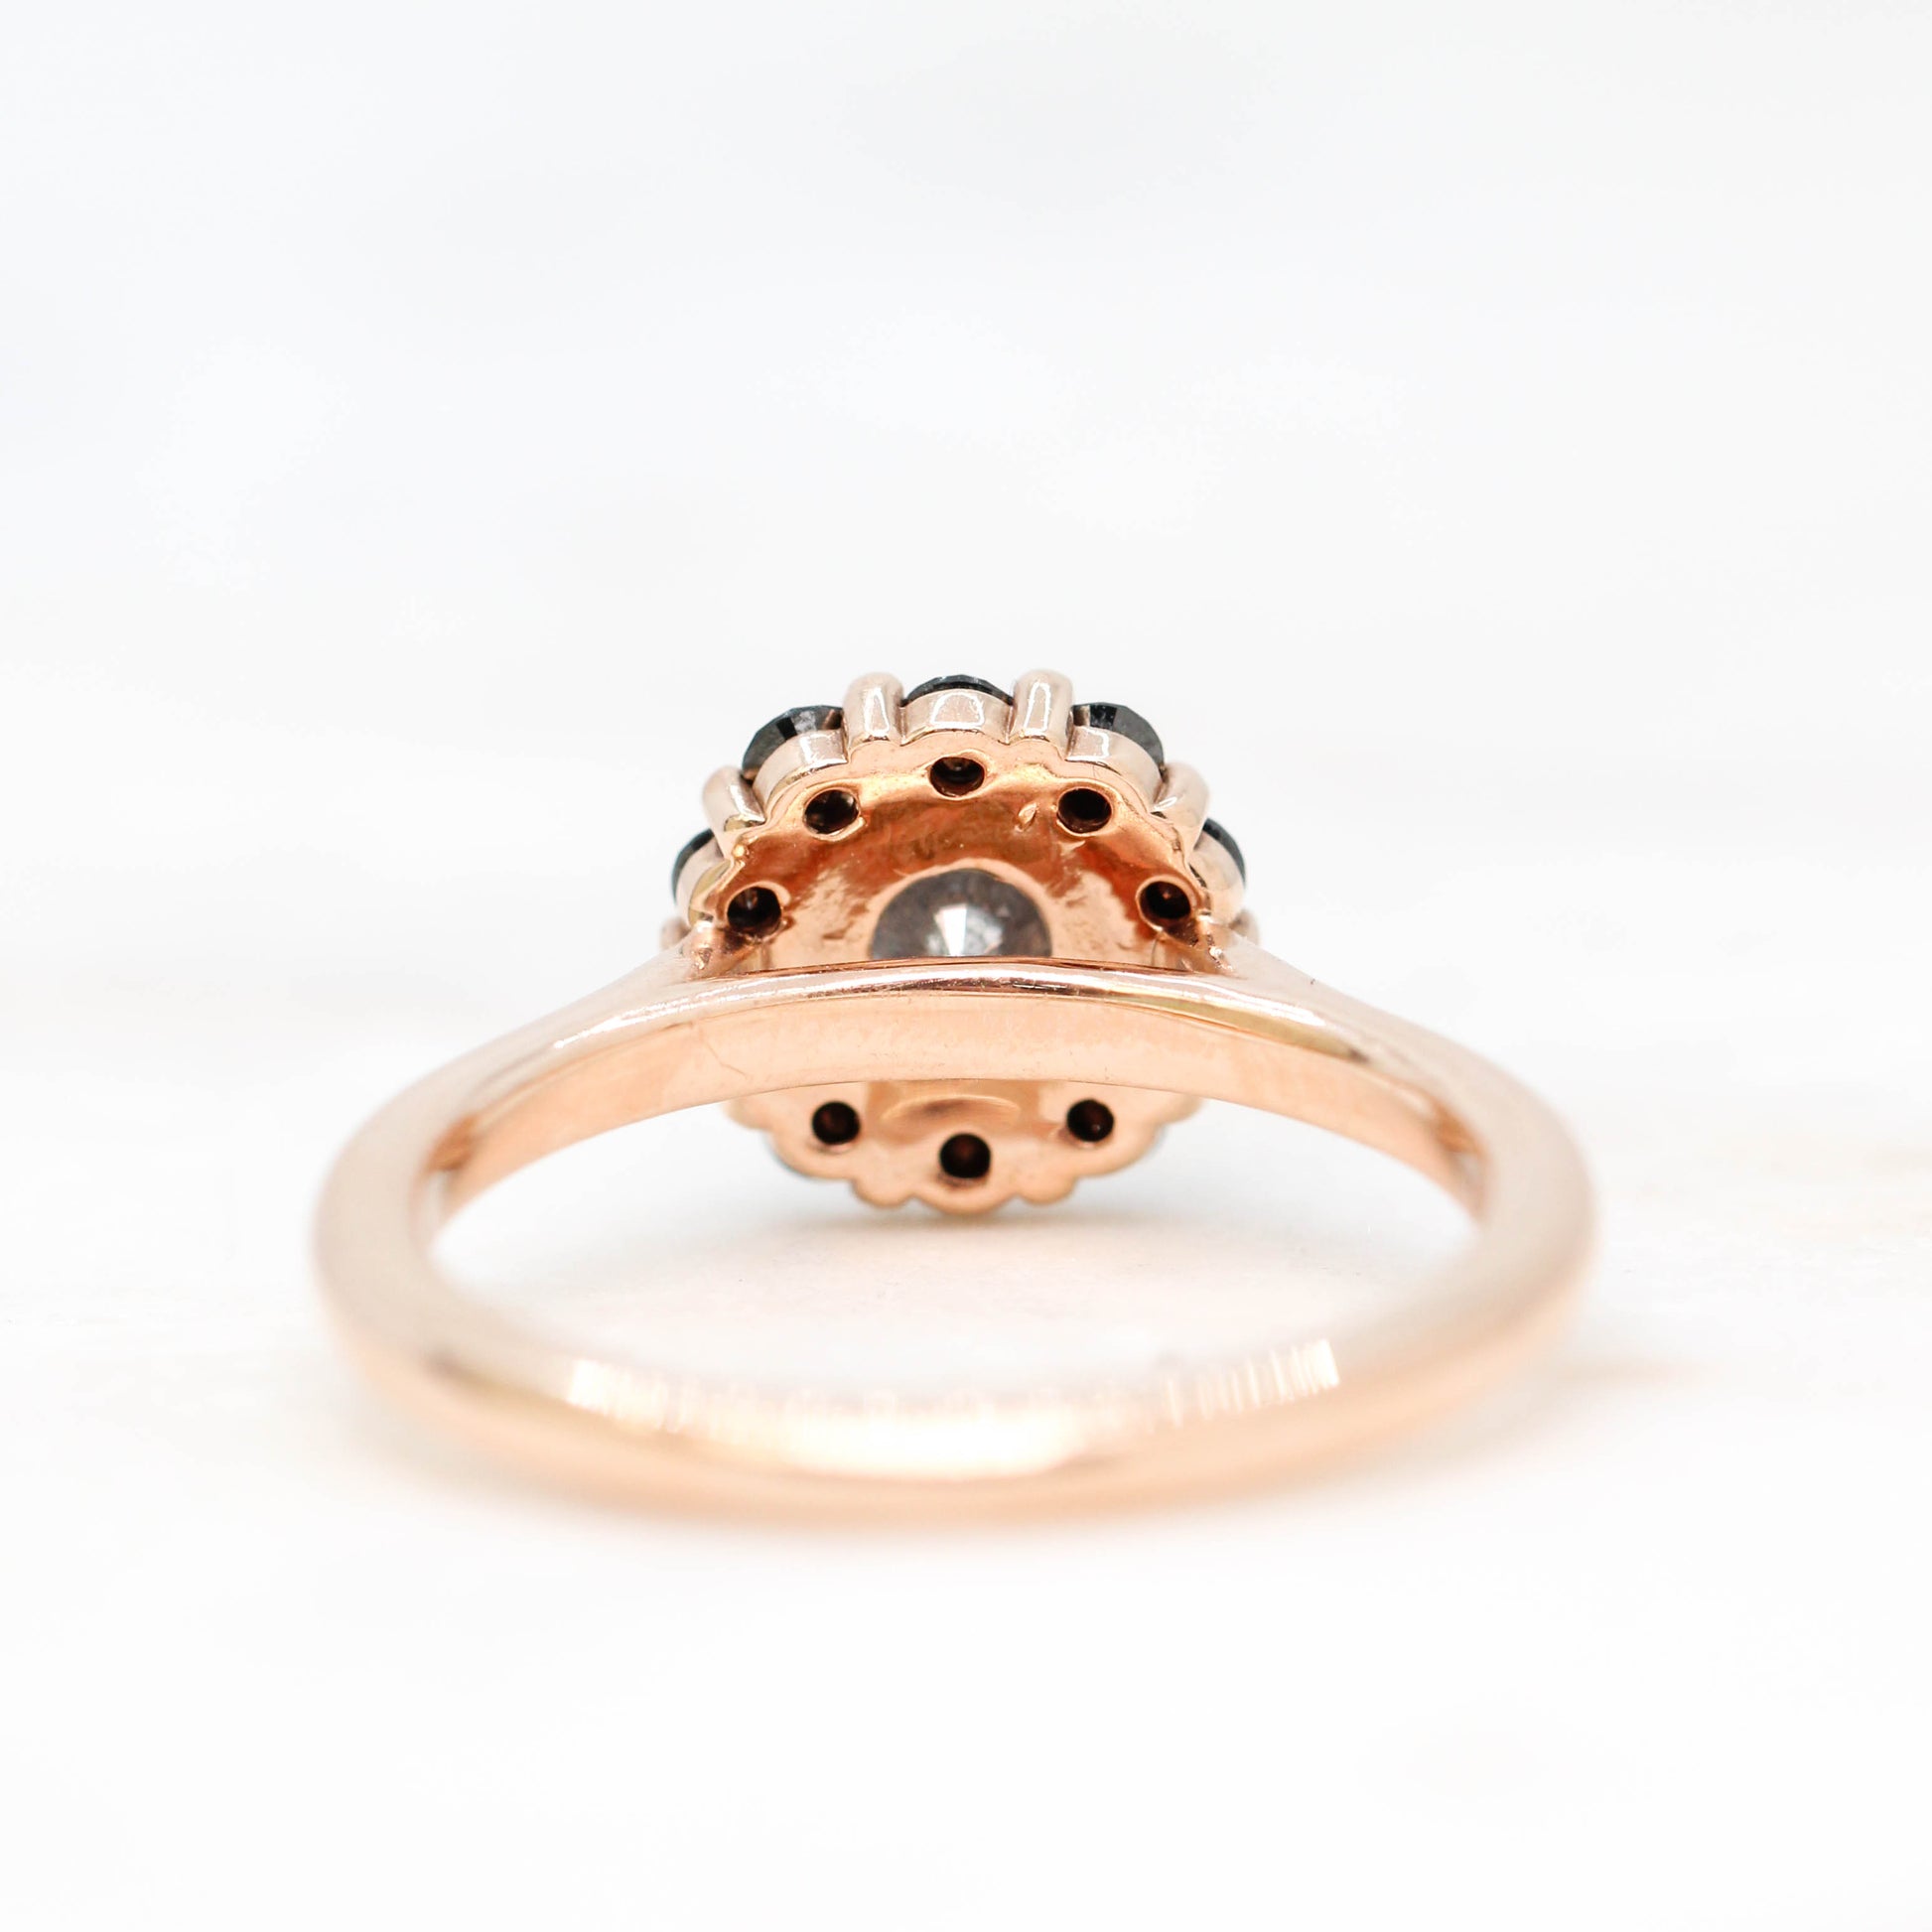 Magnolia Ring with a 1.02 Celestial Diamond and Black Diamond Accents in 14k Rose Gold - Ready to Size and Ship - Midwinter Co. Alternative Bridal Rings and Modern Fine Jewelry